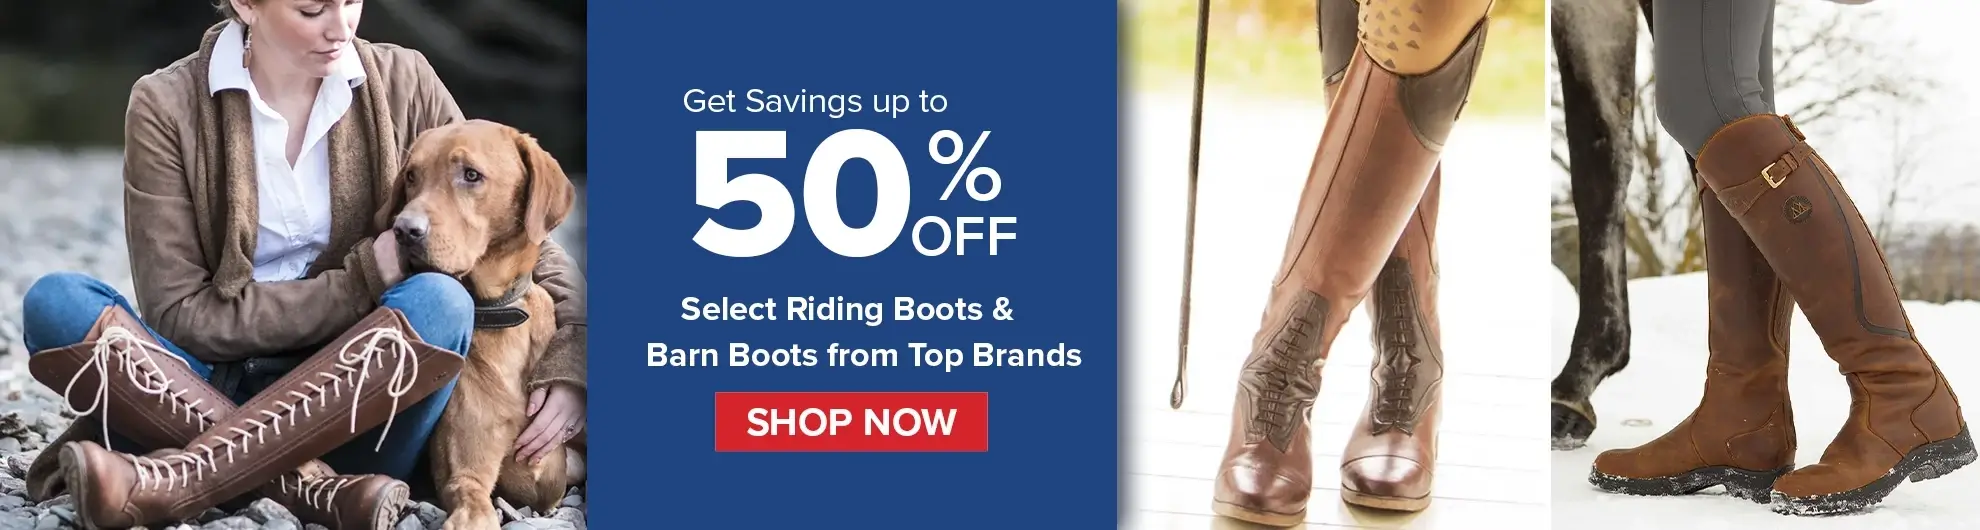 Shop for Riding Boots on Sale